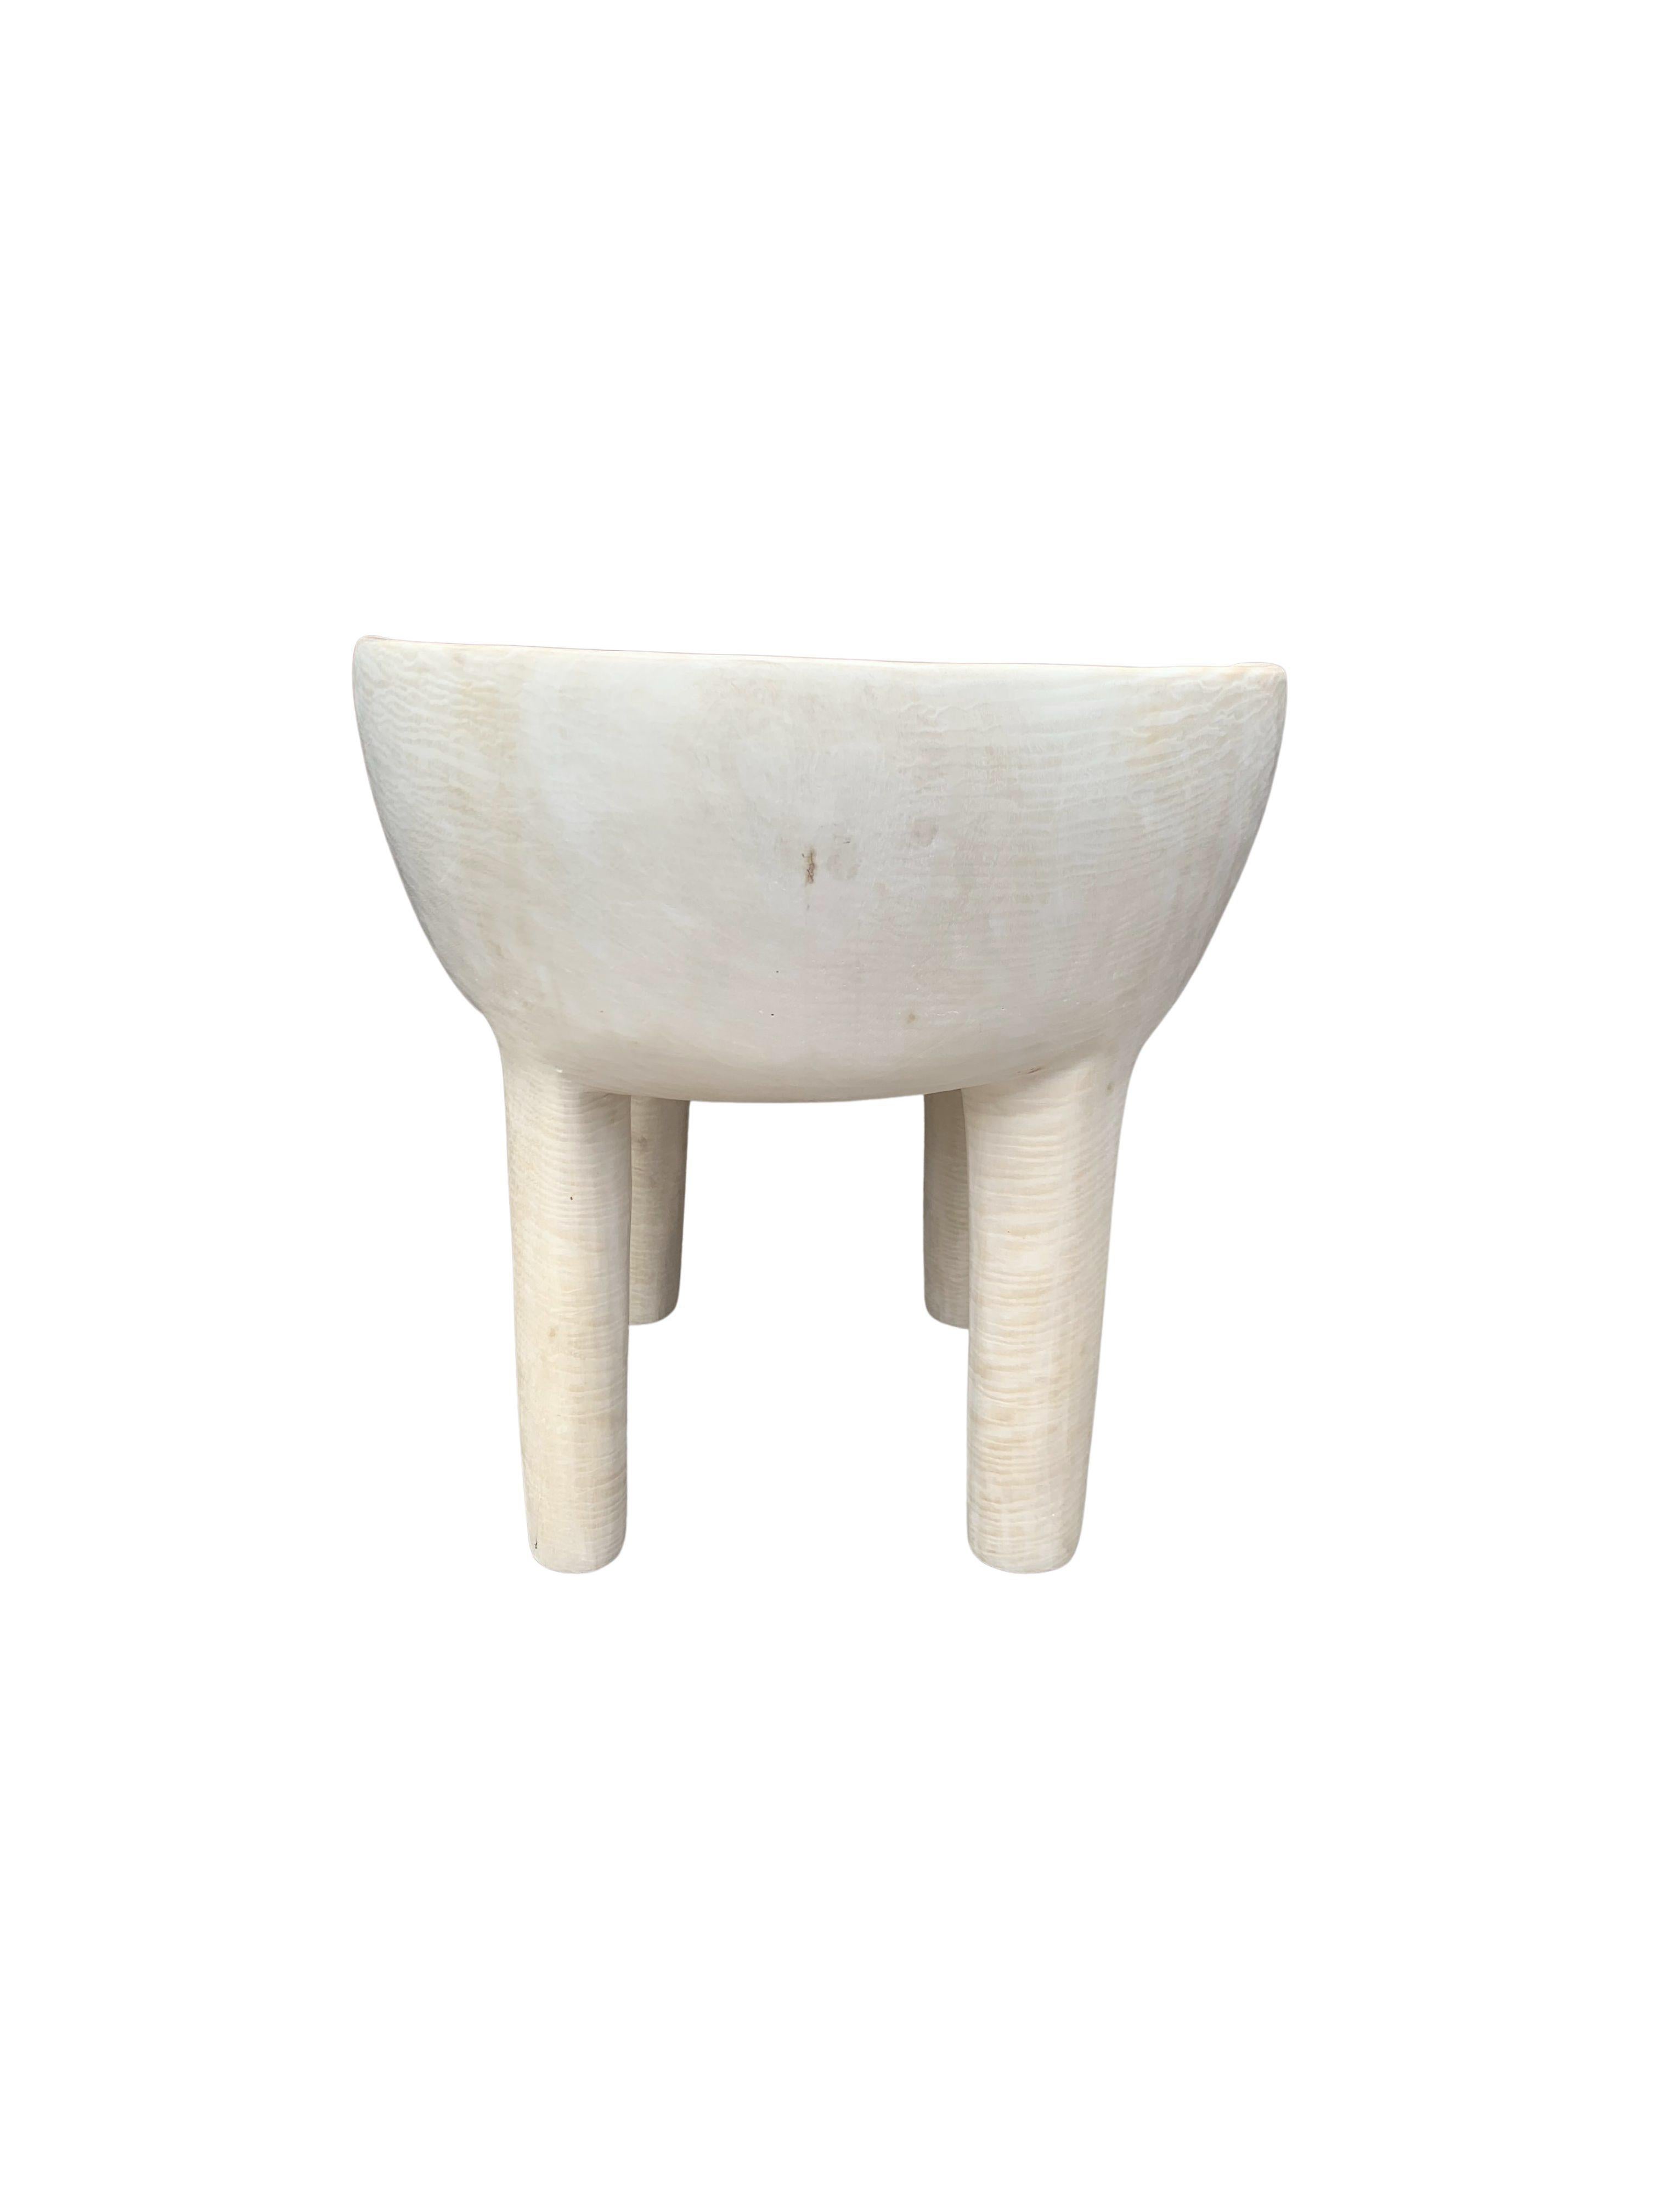 Hand-Crafted Sculptural Mango Wood Chair Bleached Finish Modern Organic For Sale